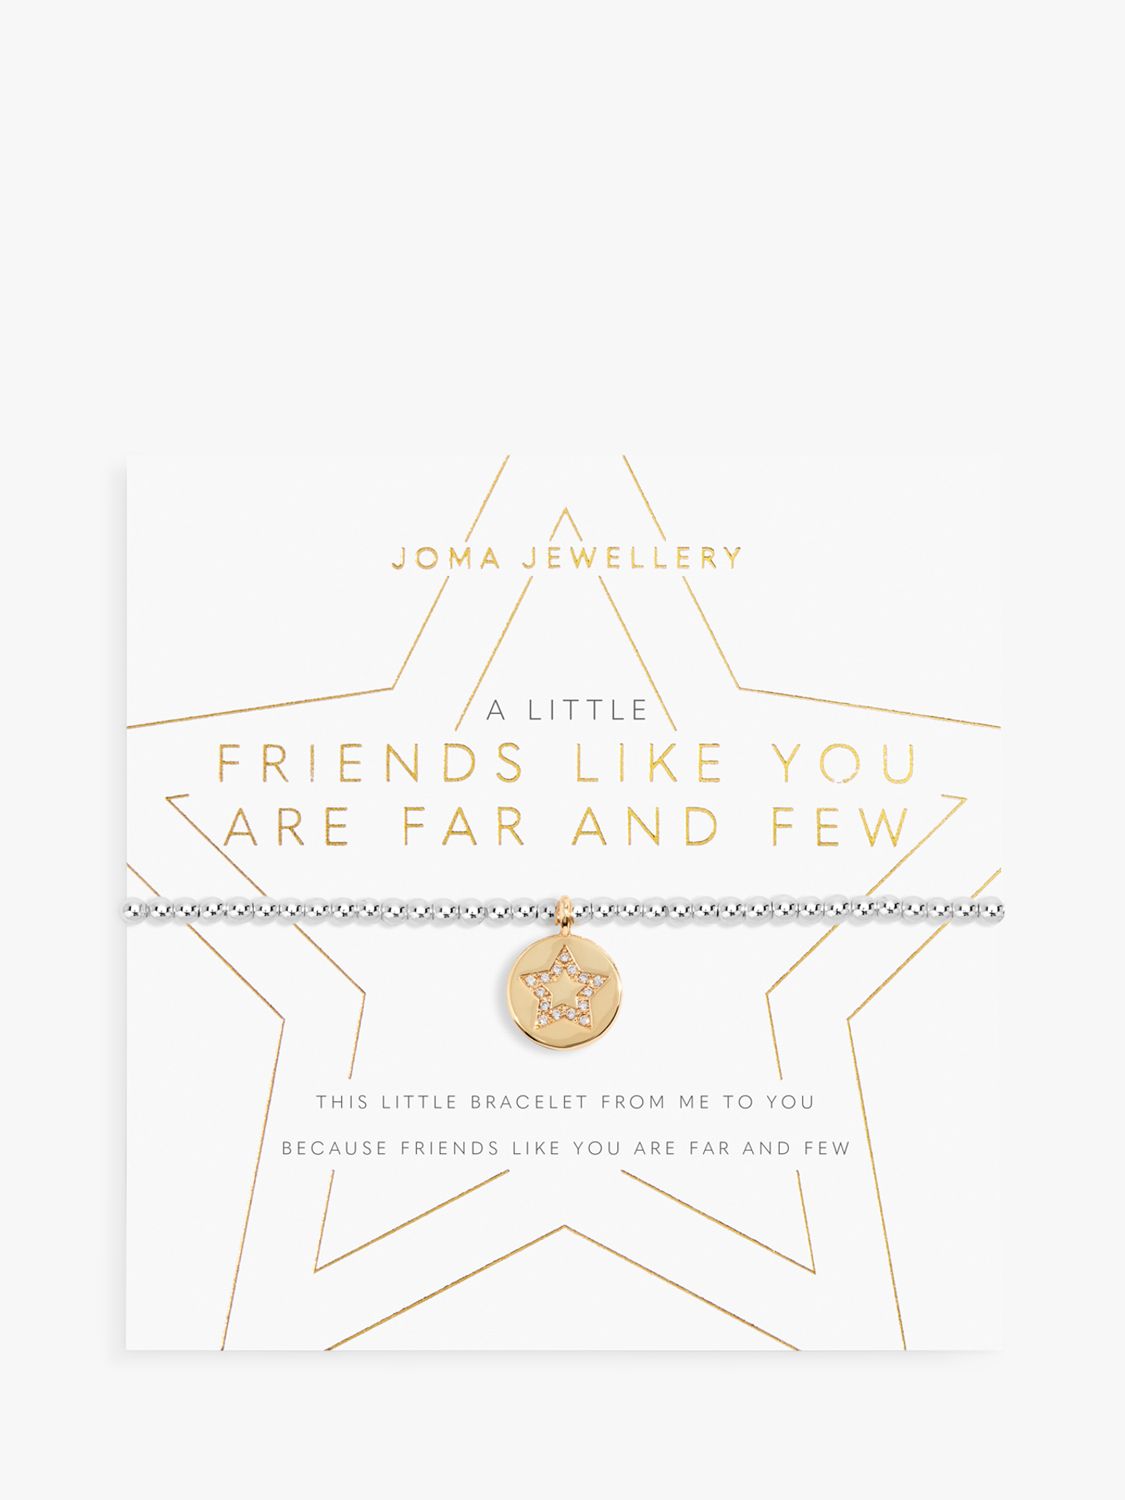 Joma Jewellery 'Friends Like You Are Far And Few' Charm Bracelet, Silver/Gold